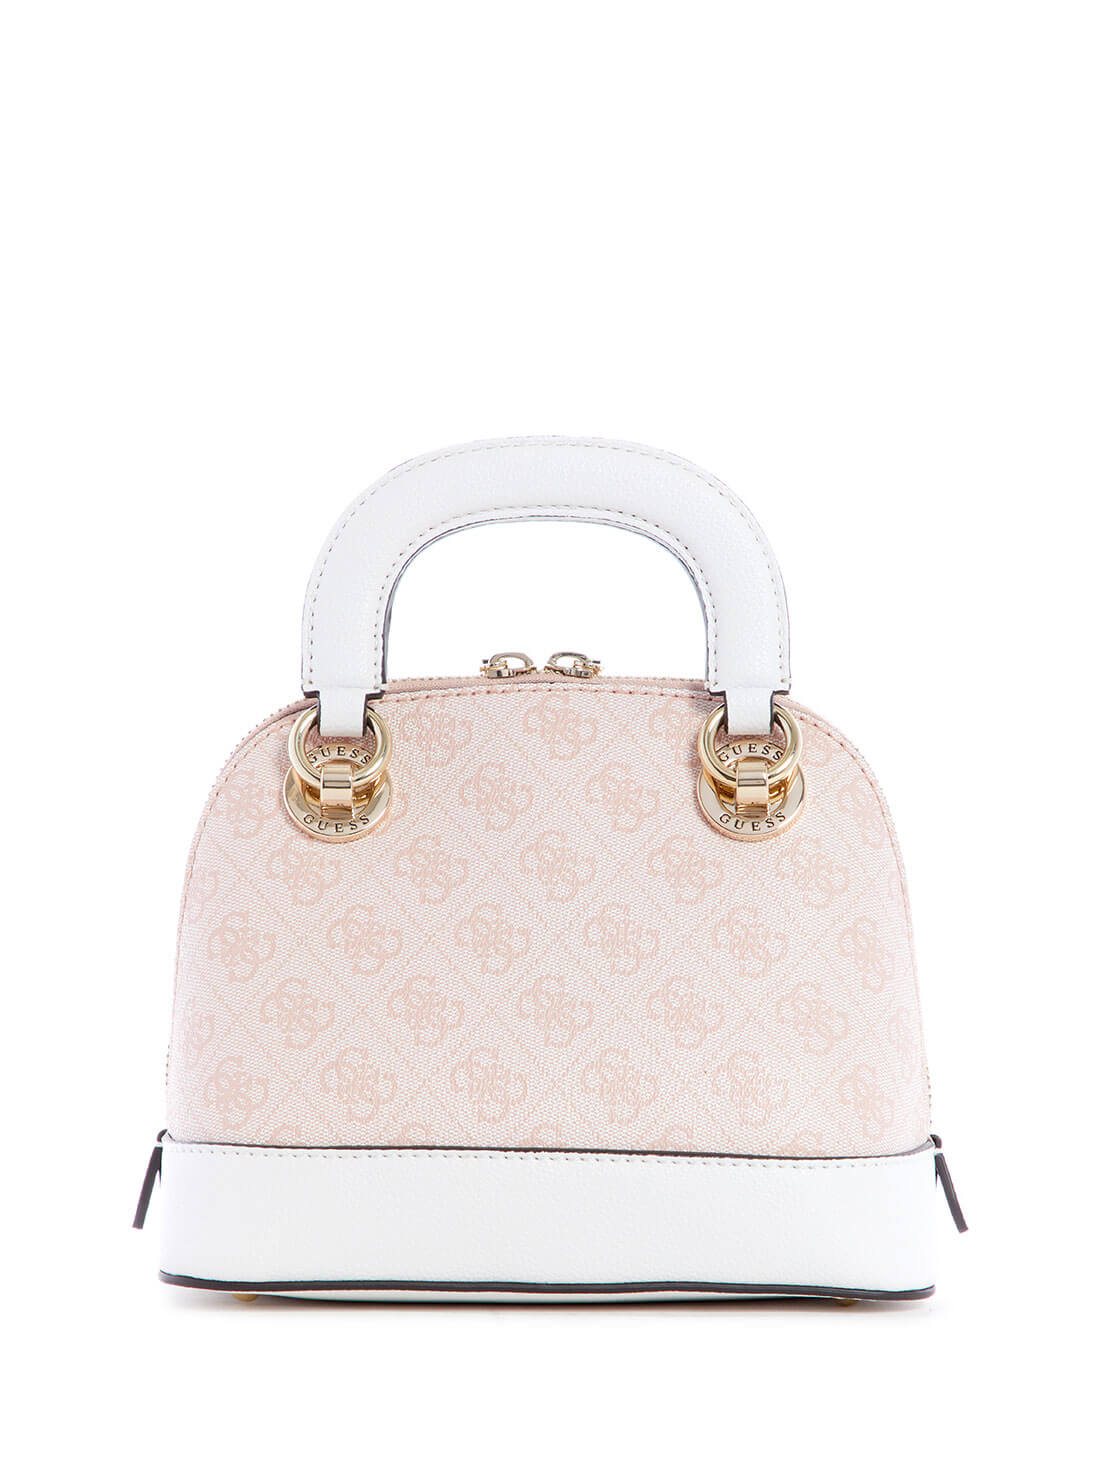 GUESS Womens Pink White Cathleen Small Dome Satchel SG773705 Back View